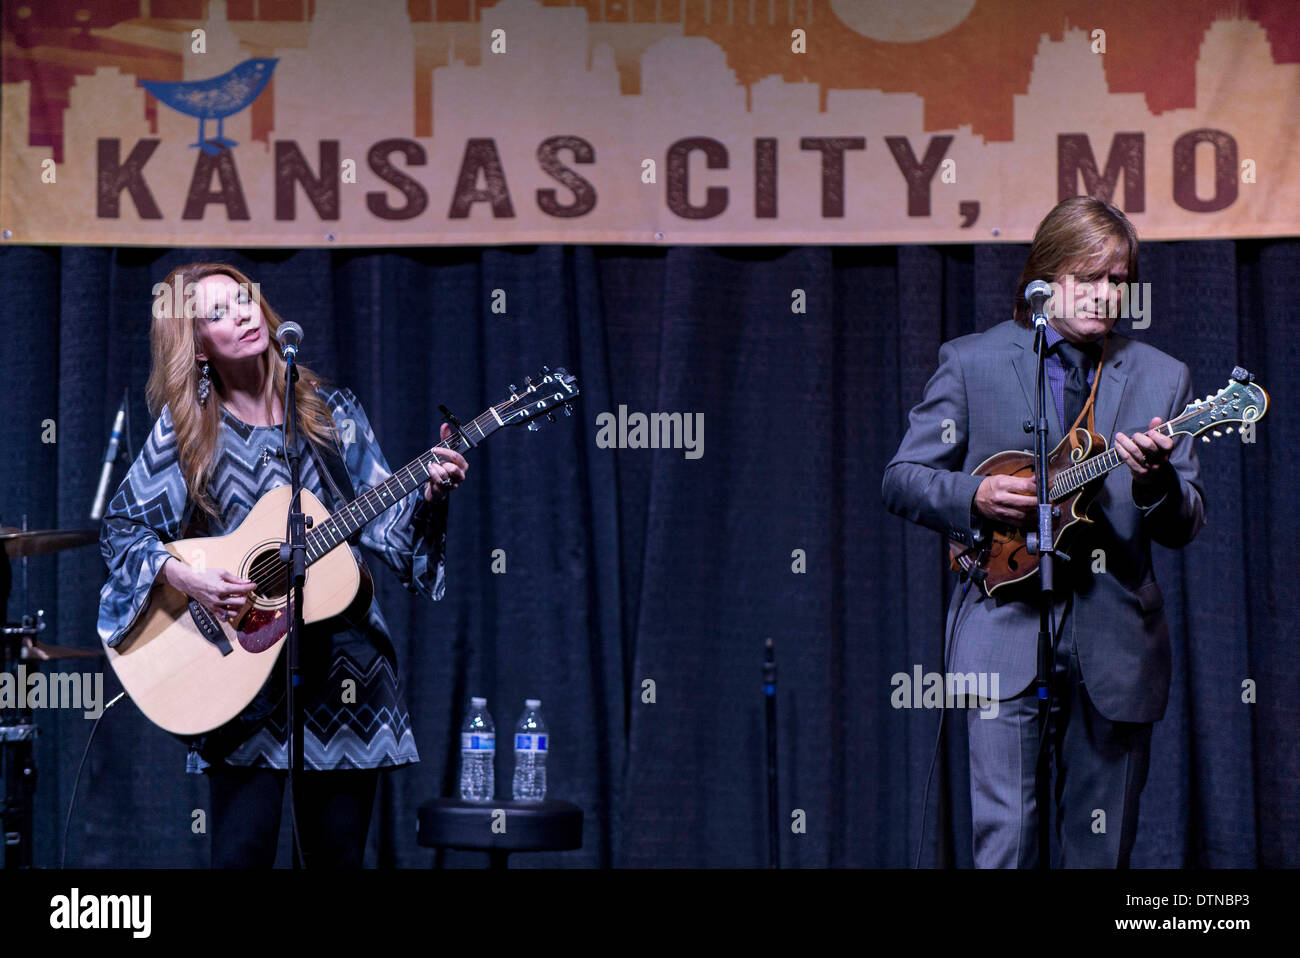 Kansas City, Missouri, USA. 20th Feb, 2014. THE ROYS perform at the 2014 Folk Alliance Conference. The annual gathering is one of the five largest music conferences in North America, bringing together some 2,000 registrants from around the world, including musicians, record company executives, music publishers, agents and managers from the world of folk and roots music. Credit:  Brian Cahn/ZUMAPRESS.com/Alamy Live News Stock Photo